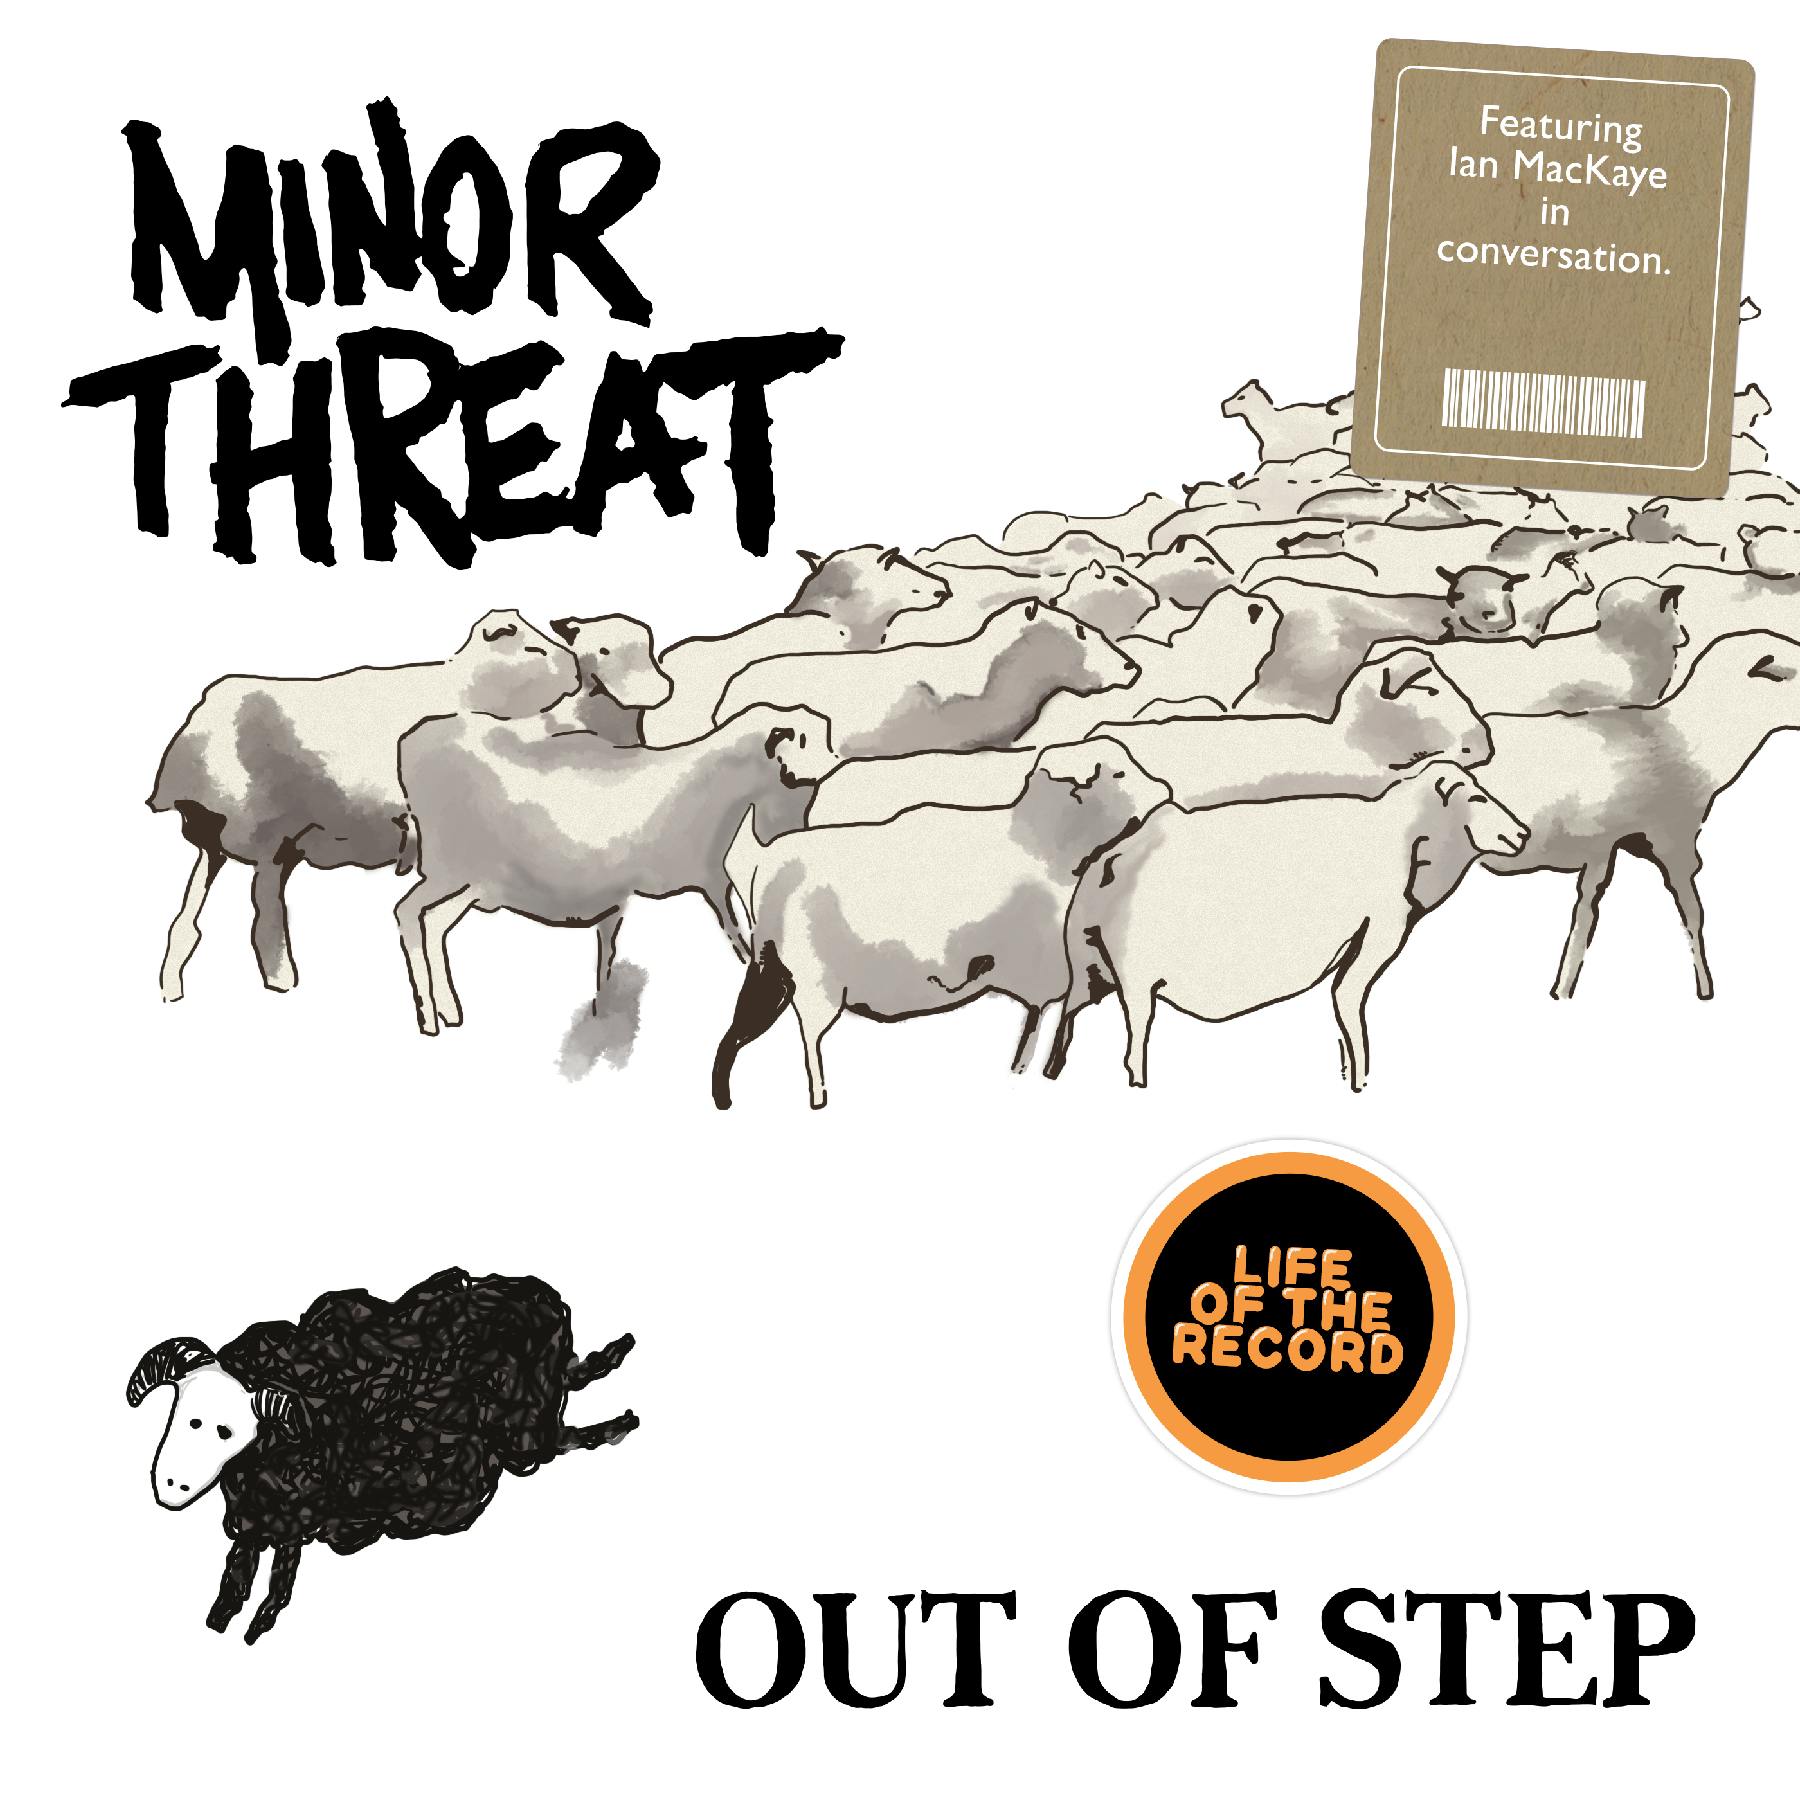 The Making of OUT OF STEP by Minor Threat - featuring Ian MacKaye